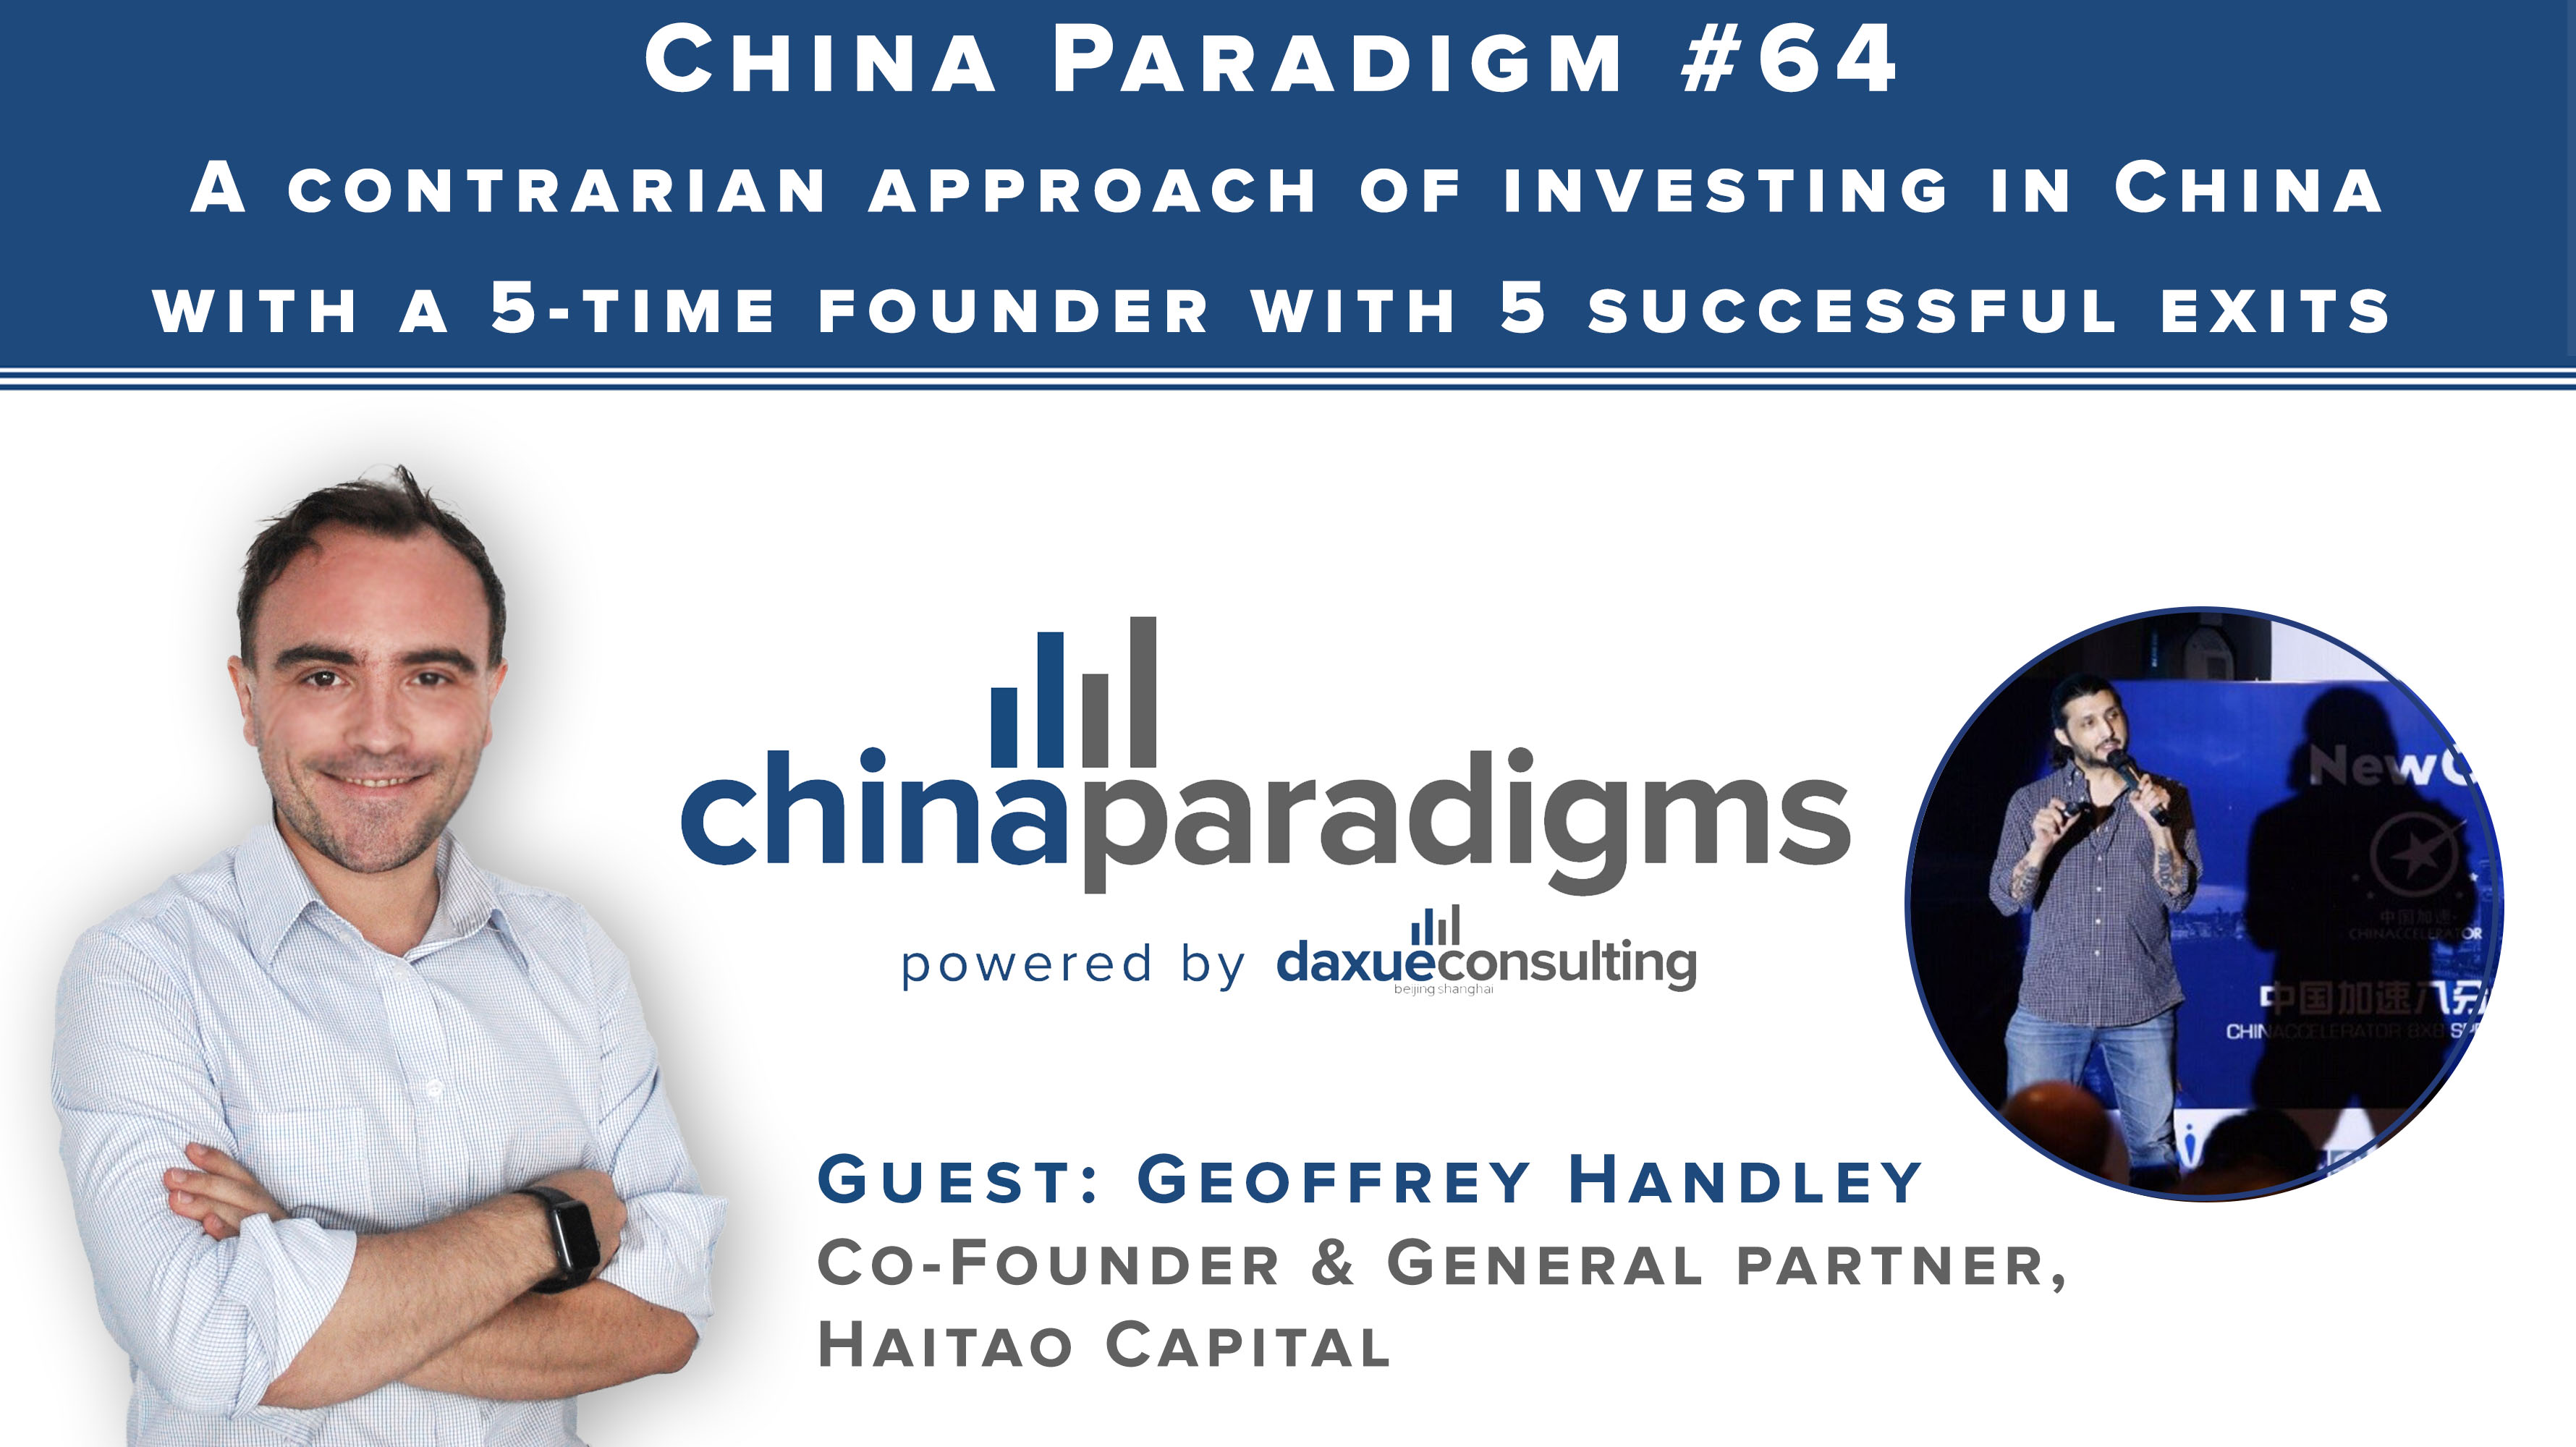 China Paradigm 64: Investing in China with a 5-time founder with 5 successful exits